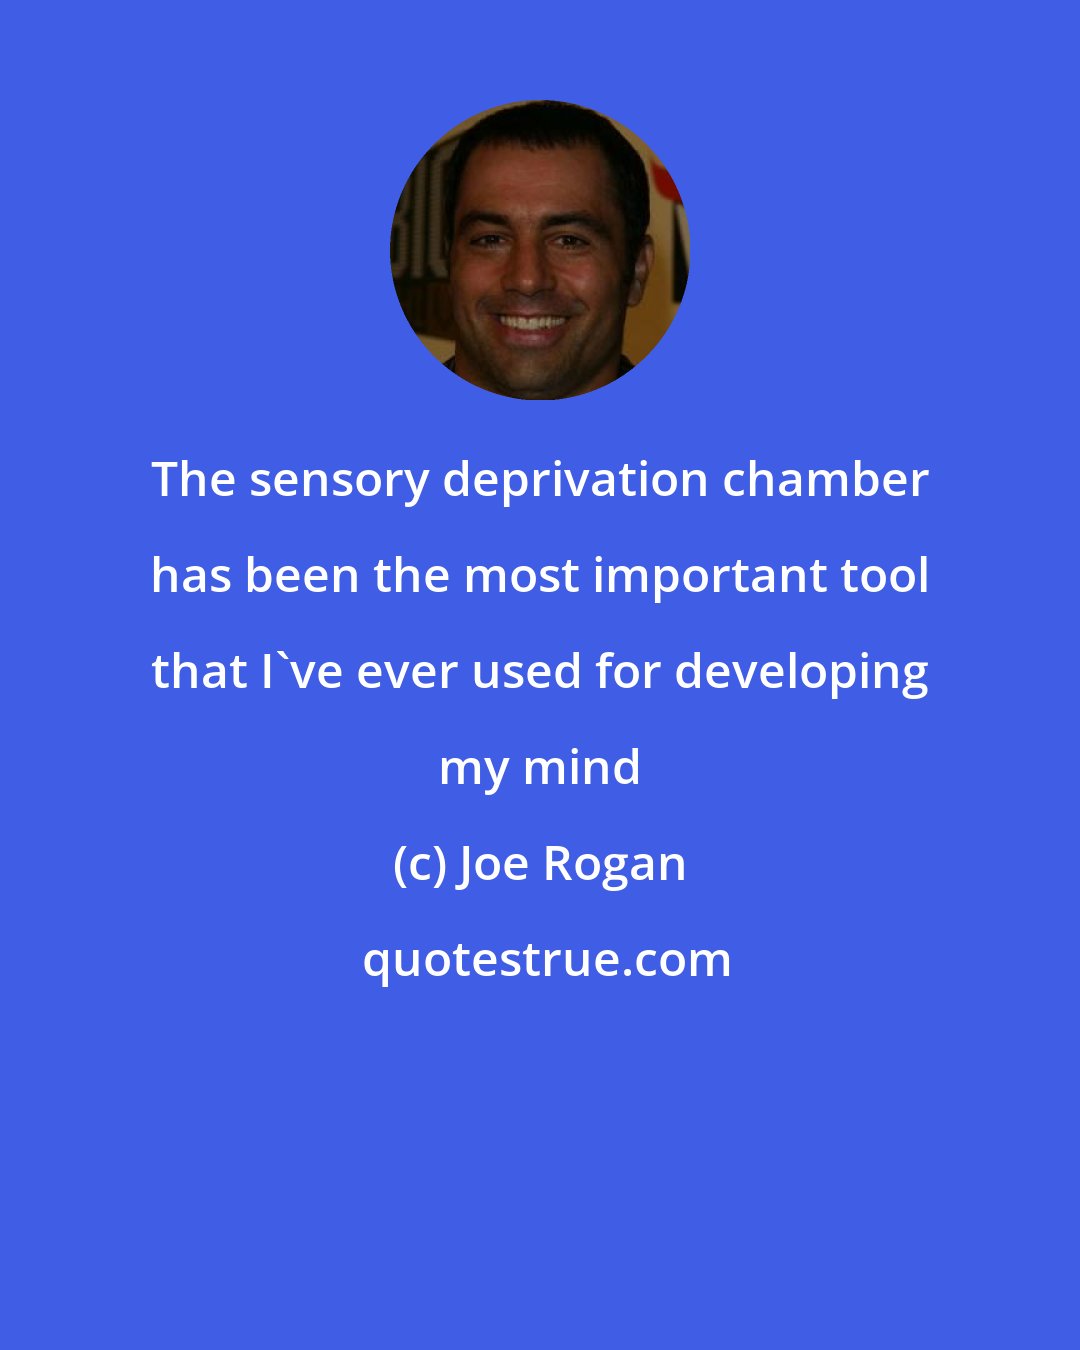 Joe Rogan: The sensory deprivation chamber has been the most important tool that I've ever used for developing my mind